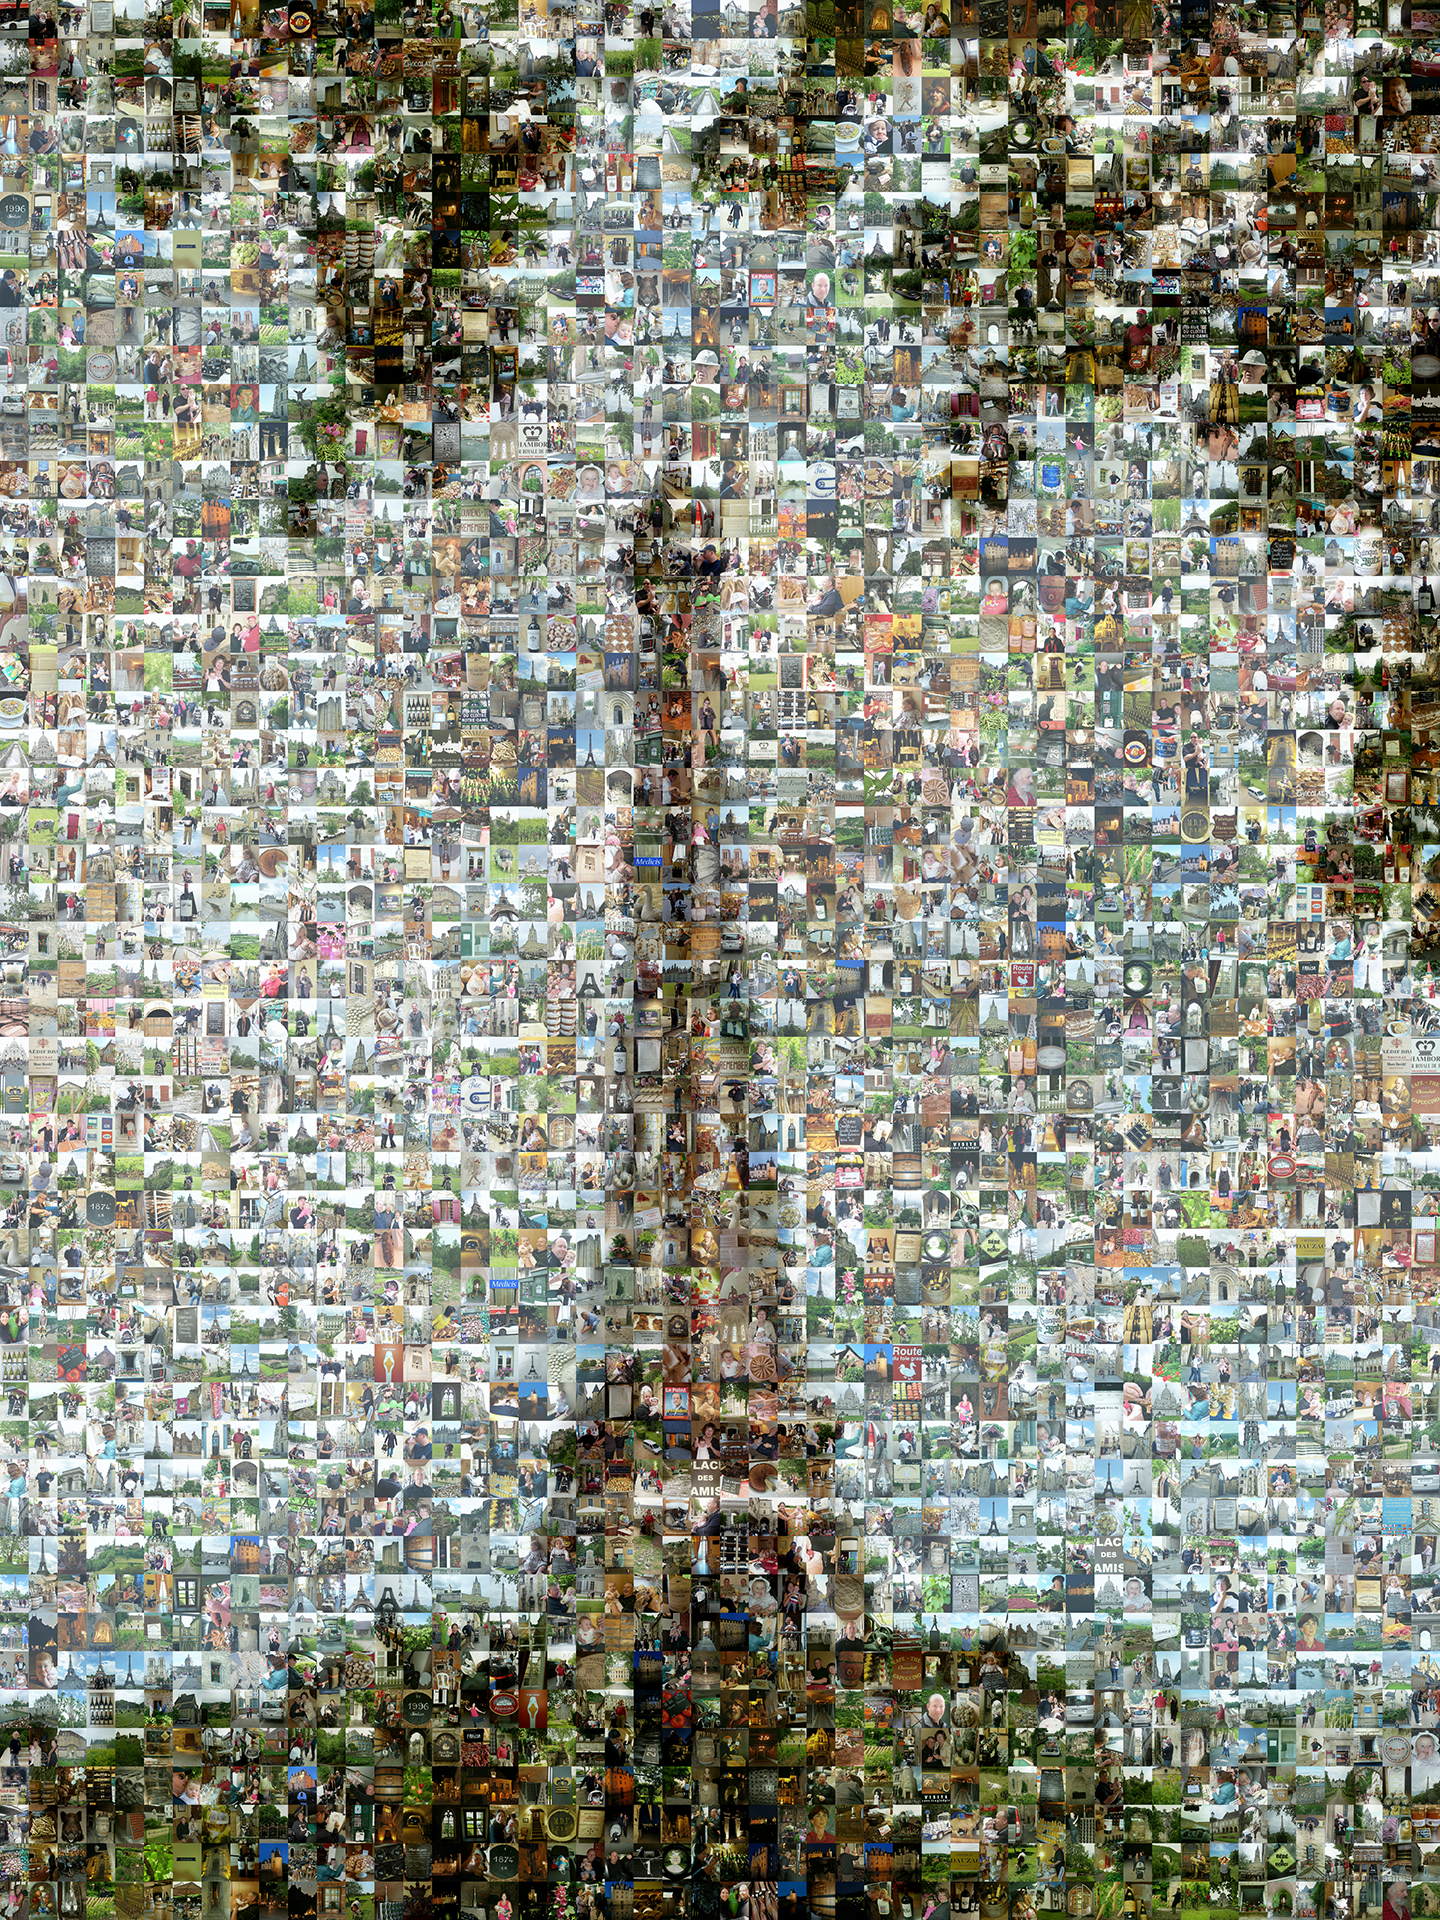 photo mosaic this Eiffel Tower was created using 1327 vacation photos